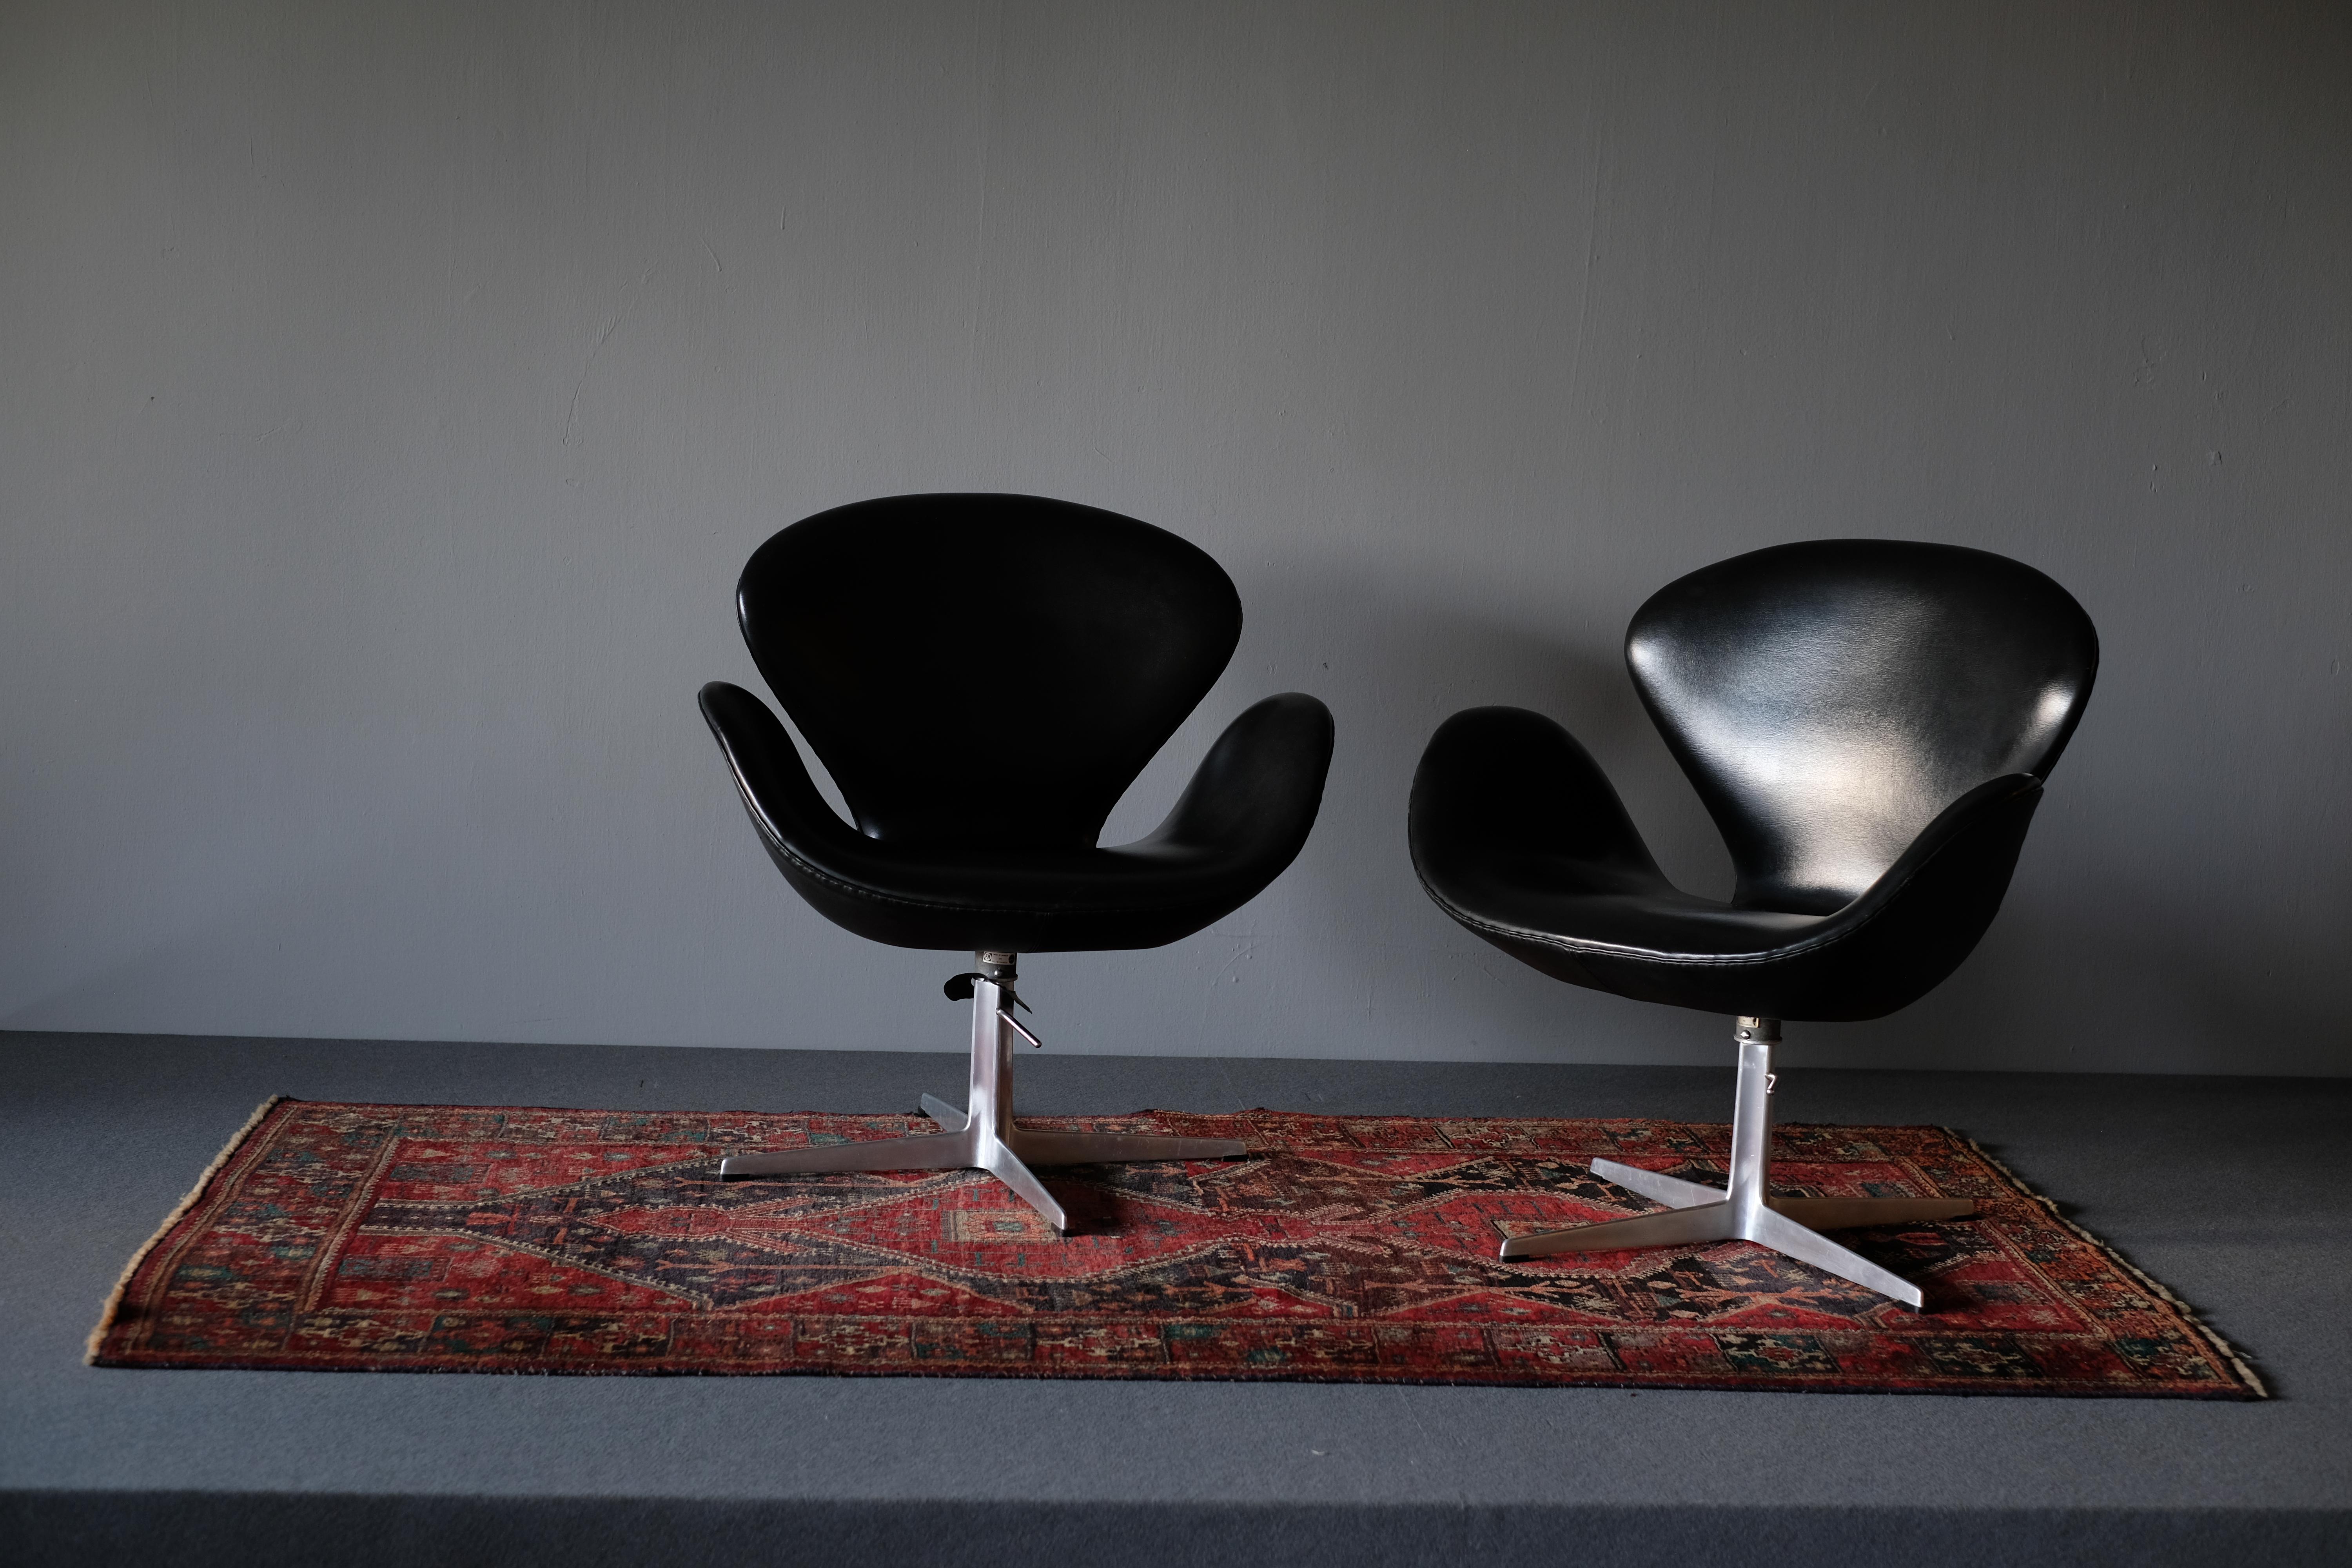 A very rare matching set of 3 Swan lounge chairs model 3320. Designed by Arne Jacobsen for the SAS Royal Copenhagen Hotel which opened in 1960. It is produced by Fritz Hansen. Each chair is upholstered in patinated black Skai which is not in